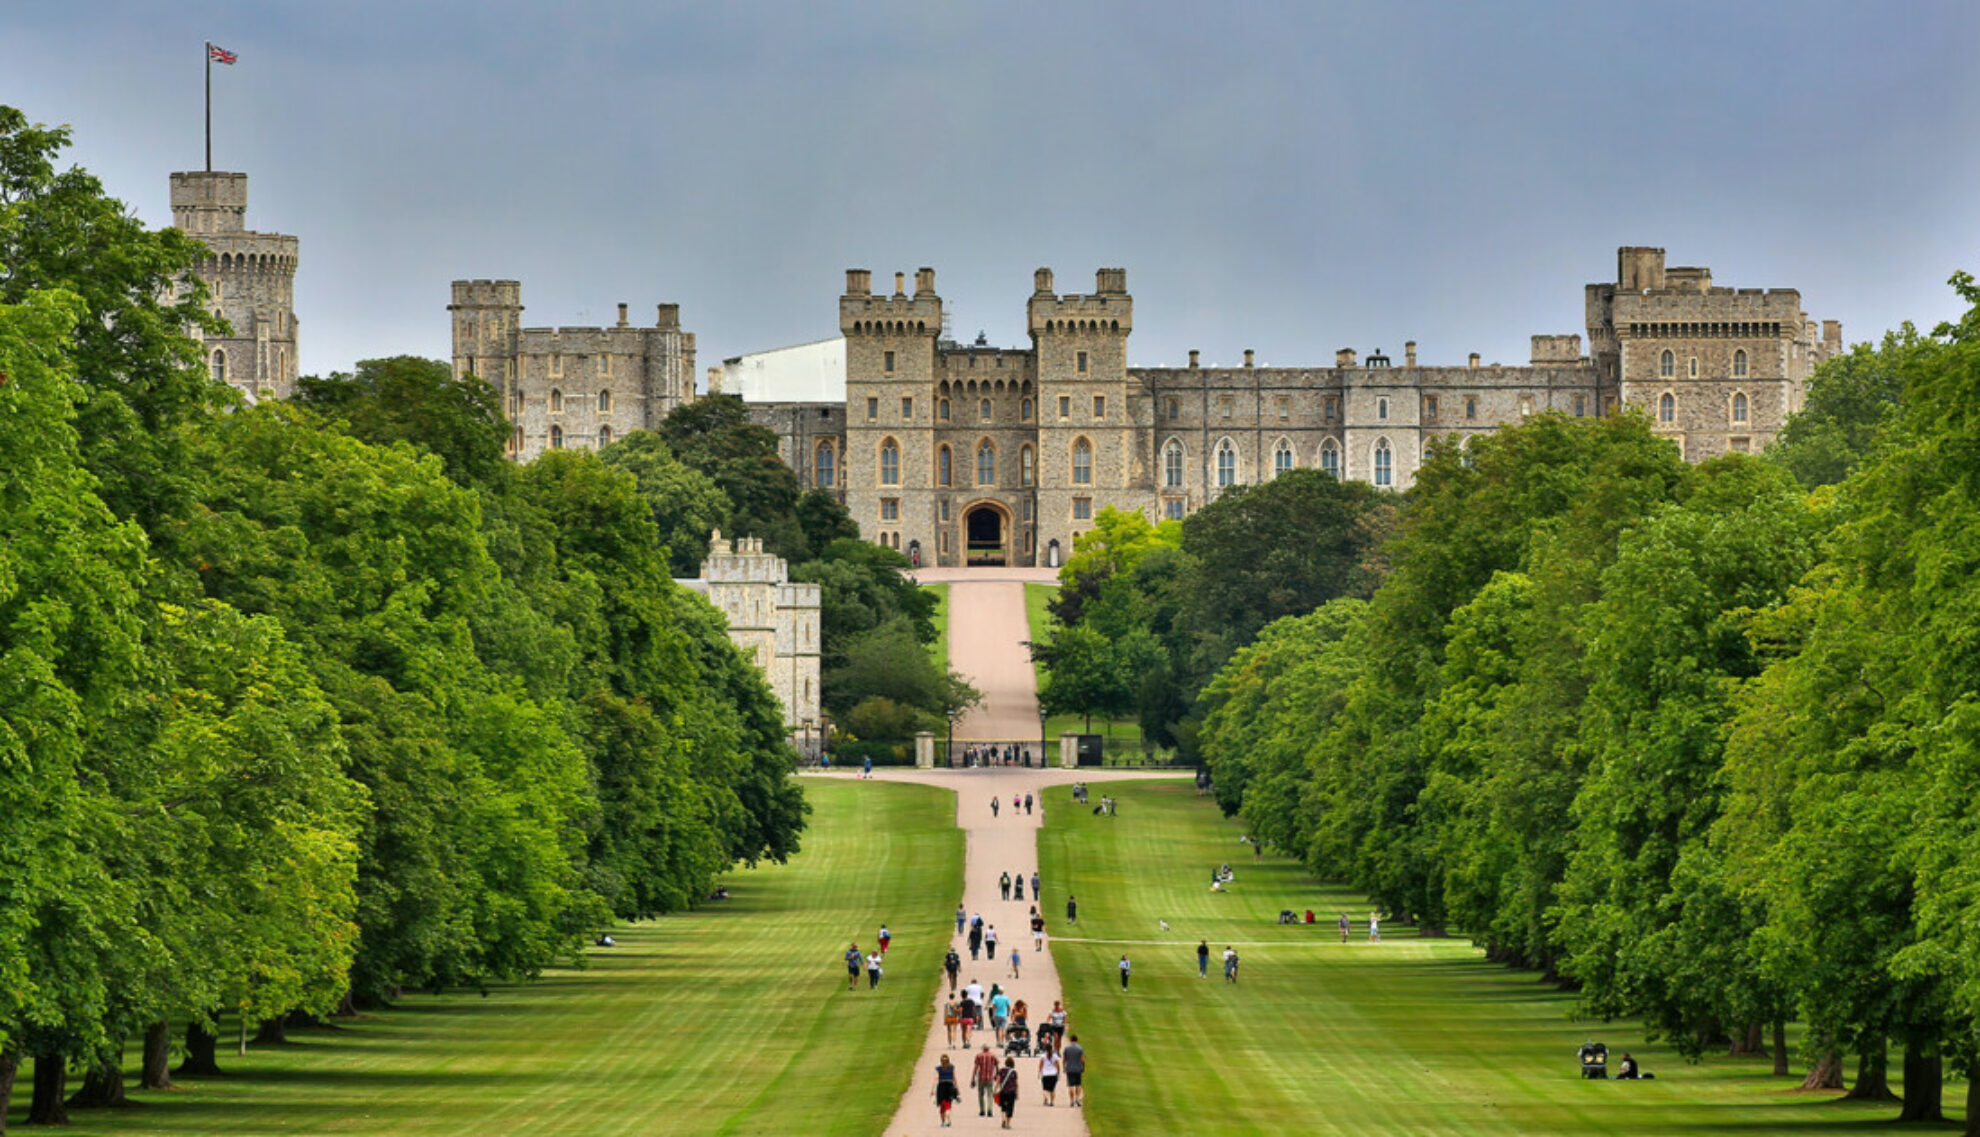 Windsor Castle in the East of England